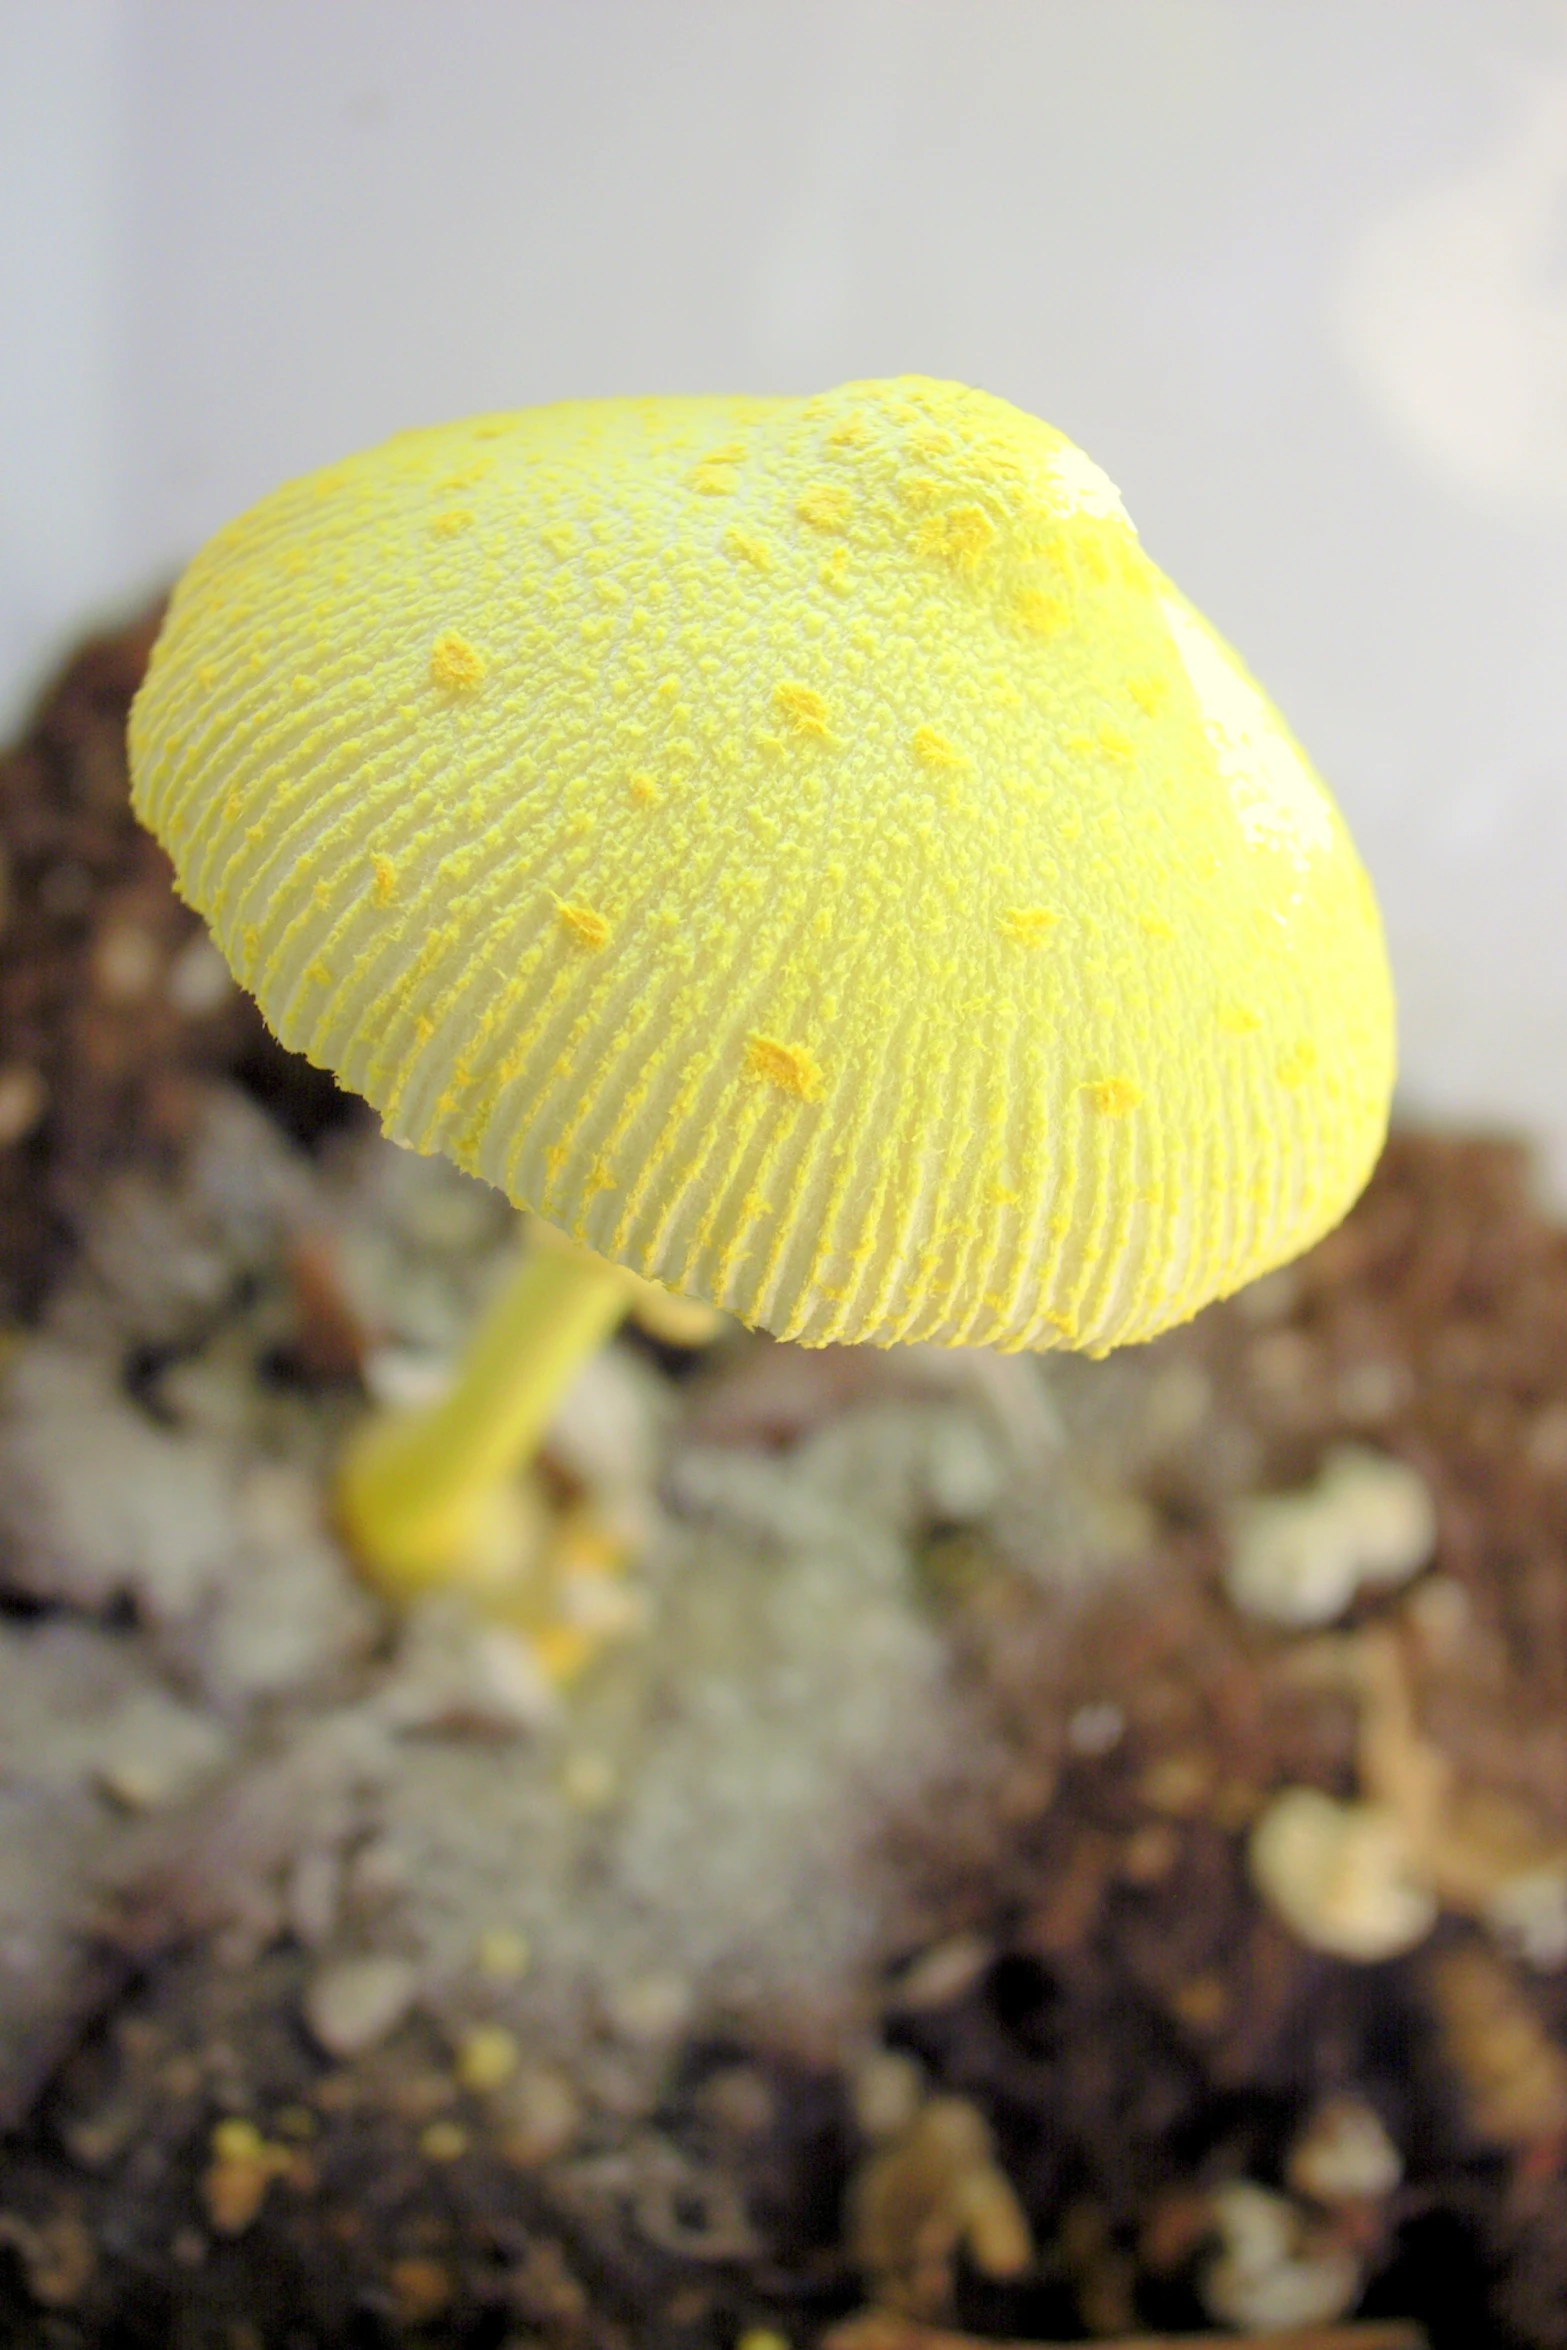 yellow mushroom growing out of dirt in front of white wall